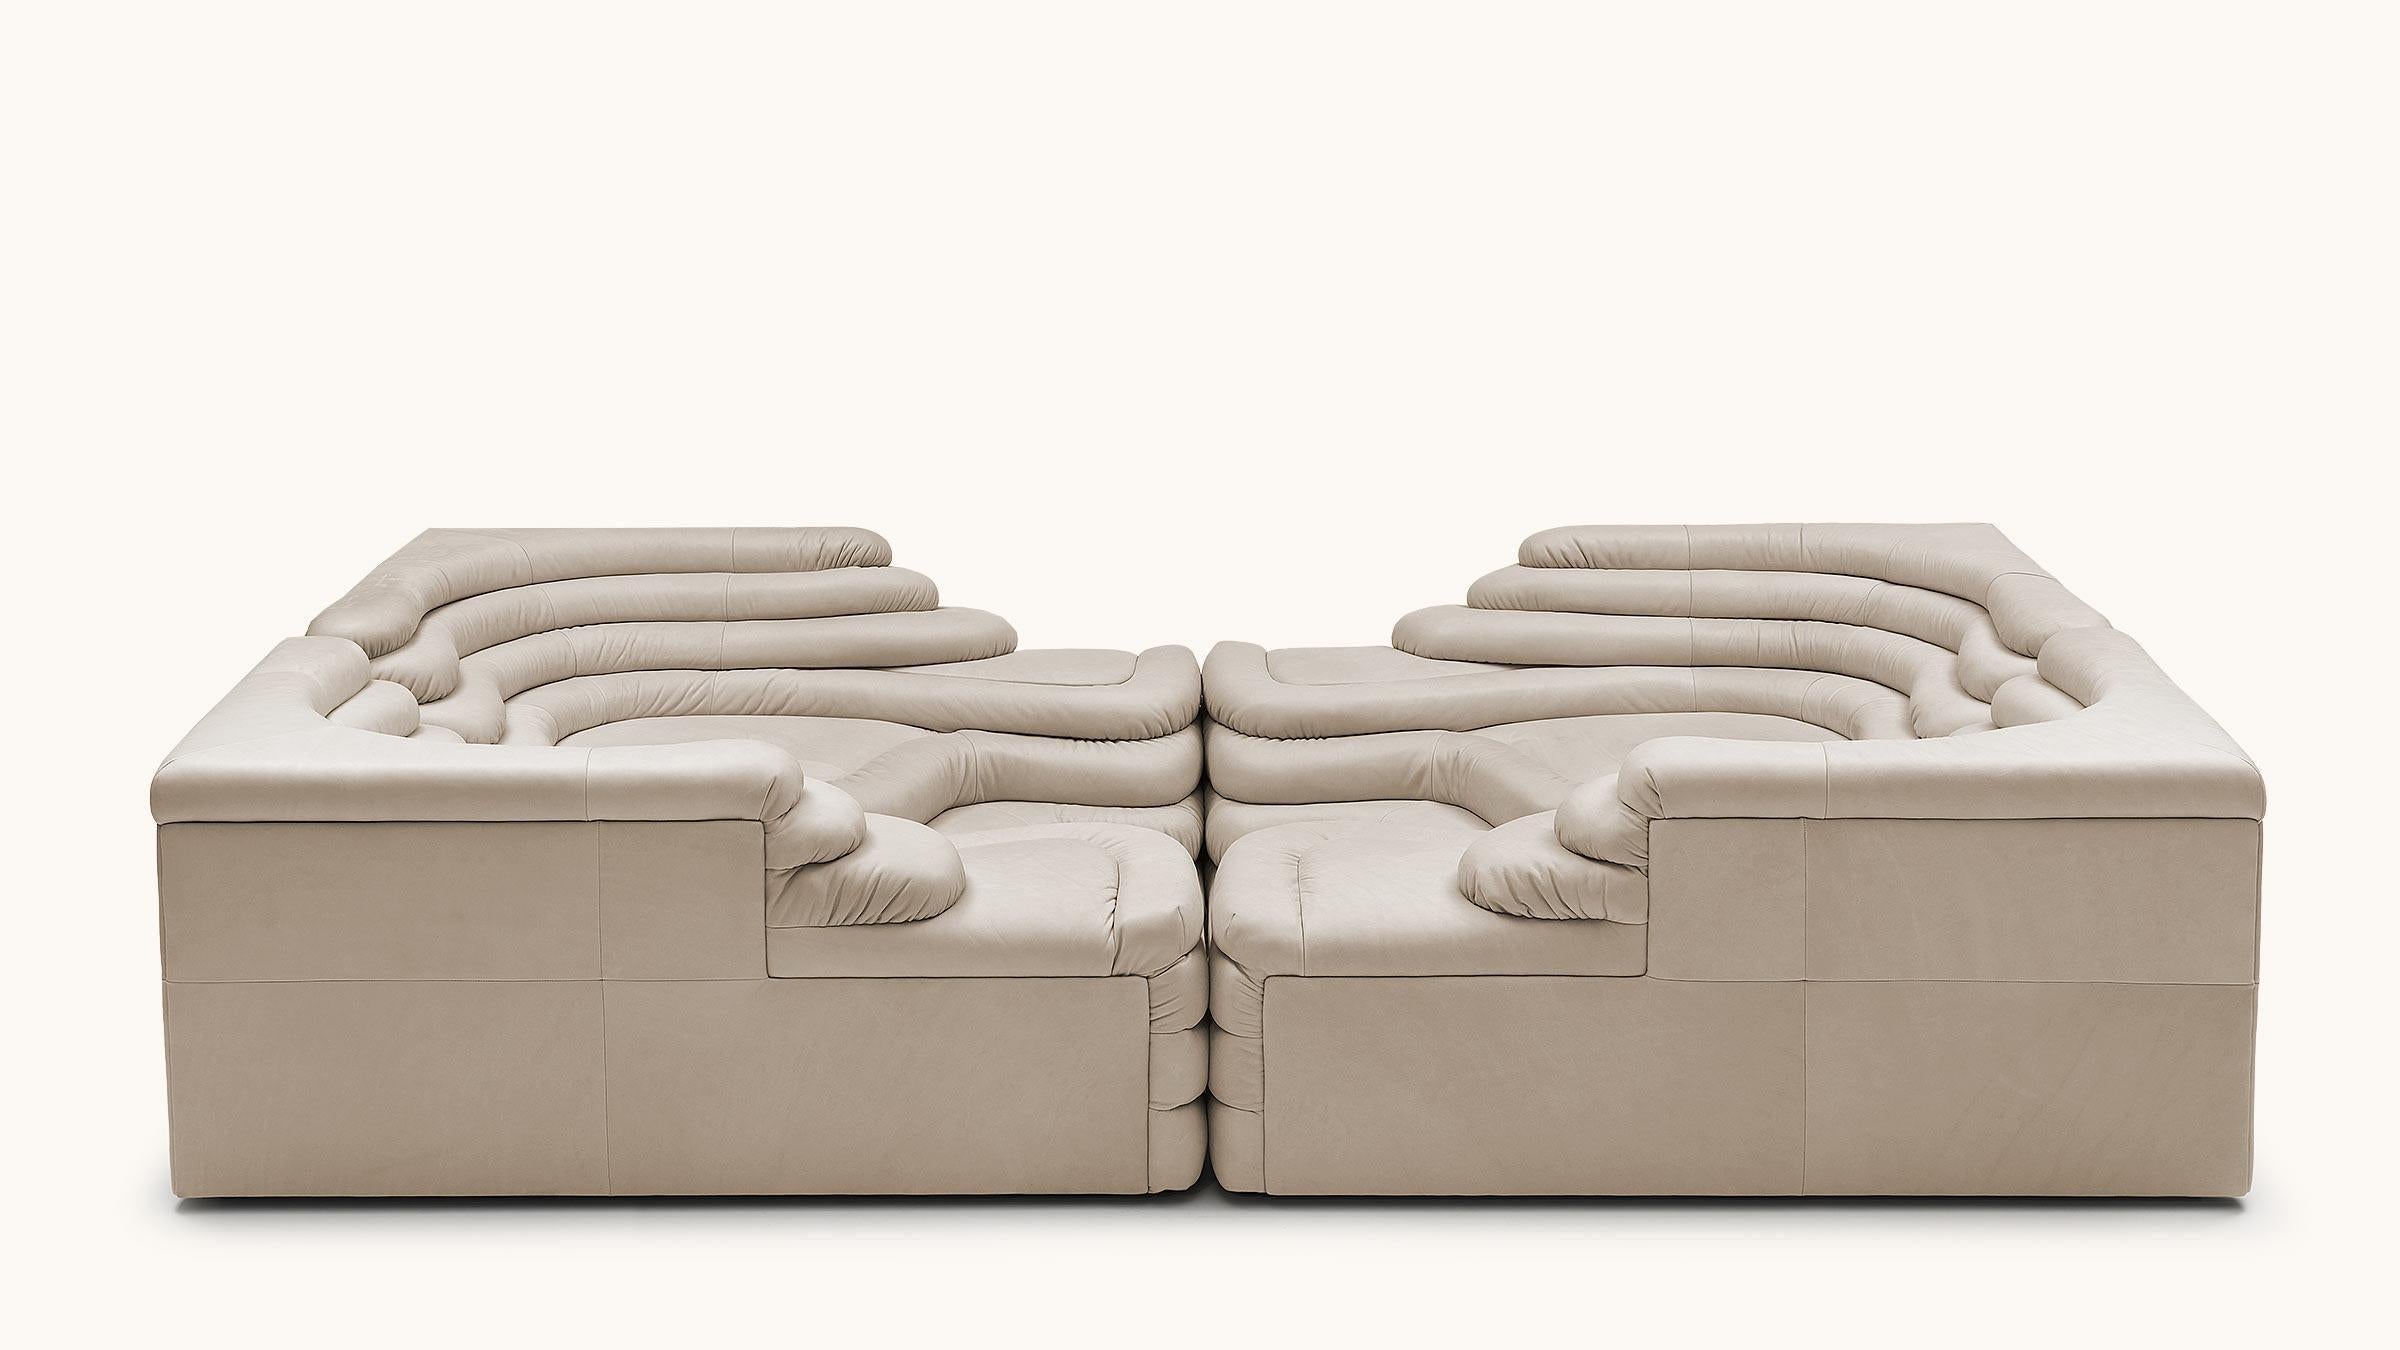 De Sede DS-1025/09 Terrazza Sofa in Perla Upholstery by Ubald Klug In New Condition For Sale In Brooklyn, NY